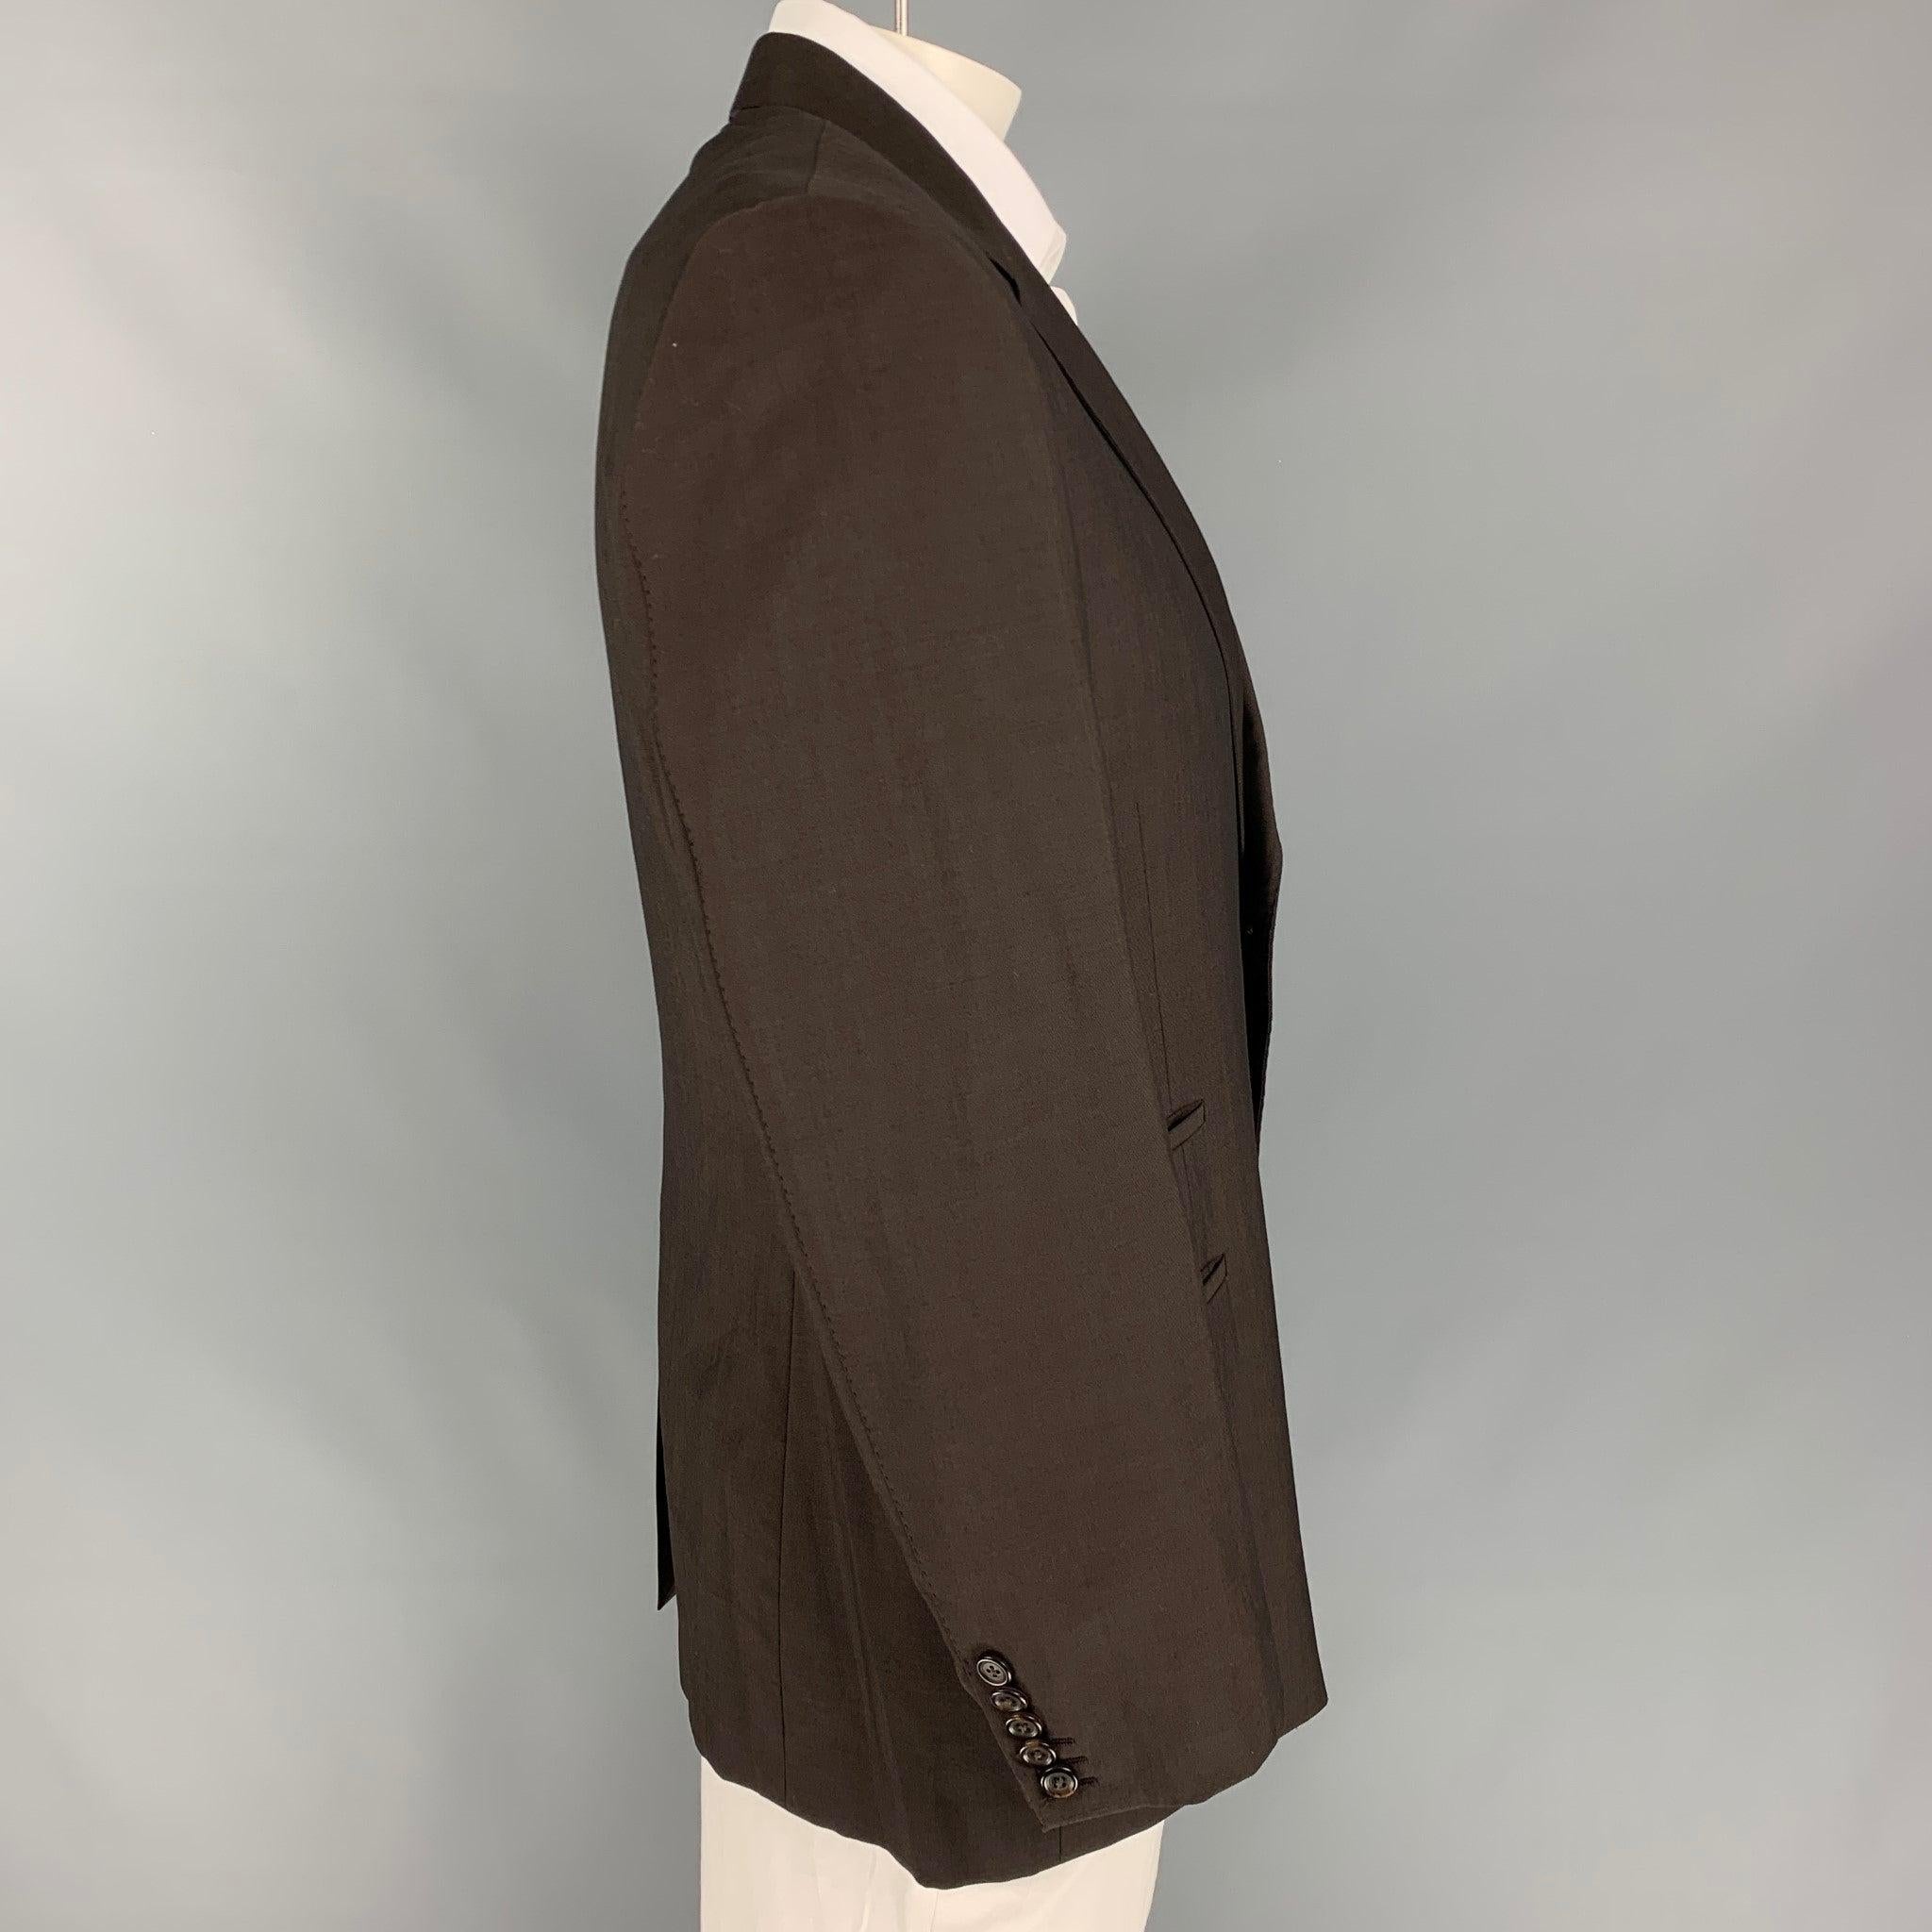 PAUL SMITH
sport coat comes in a brown wool / mohair wih a full liner featuring a notch lapel, front pockets, and a double button closure. Made in Italy.
Very Good
Pre-Owned Condition.  

Marked:   44 

Measurements: 
 
Shoulder: 19 inches Chest: 44